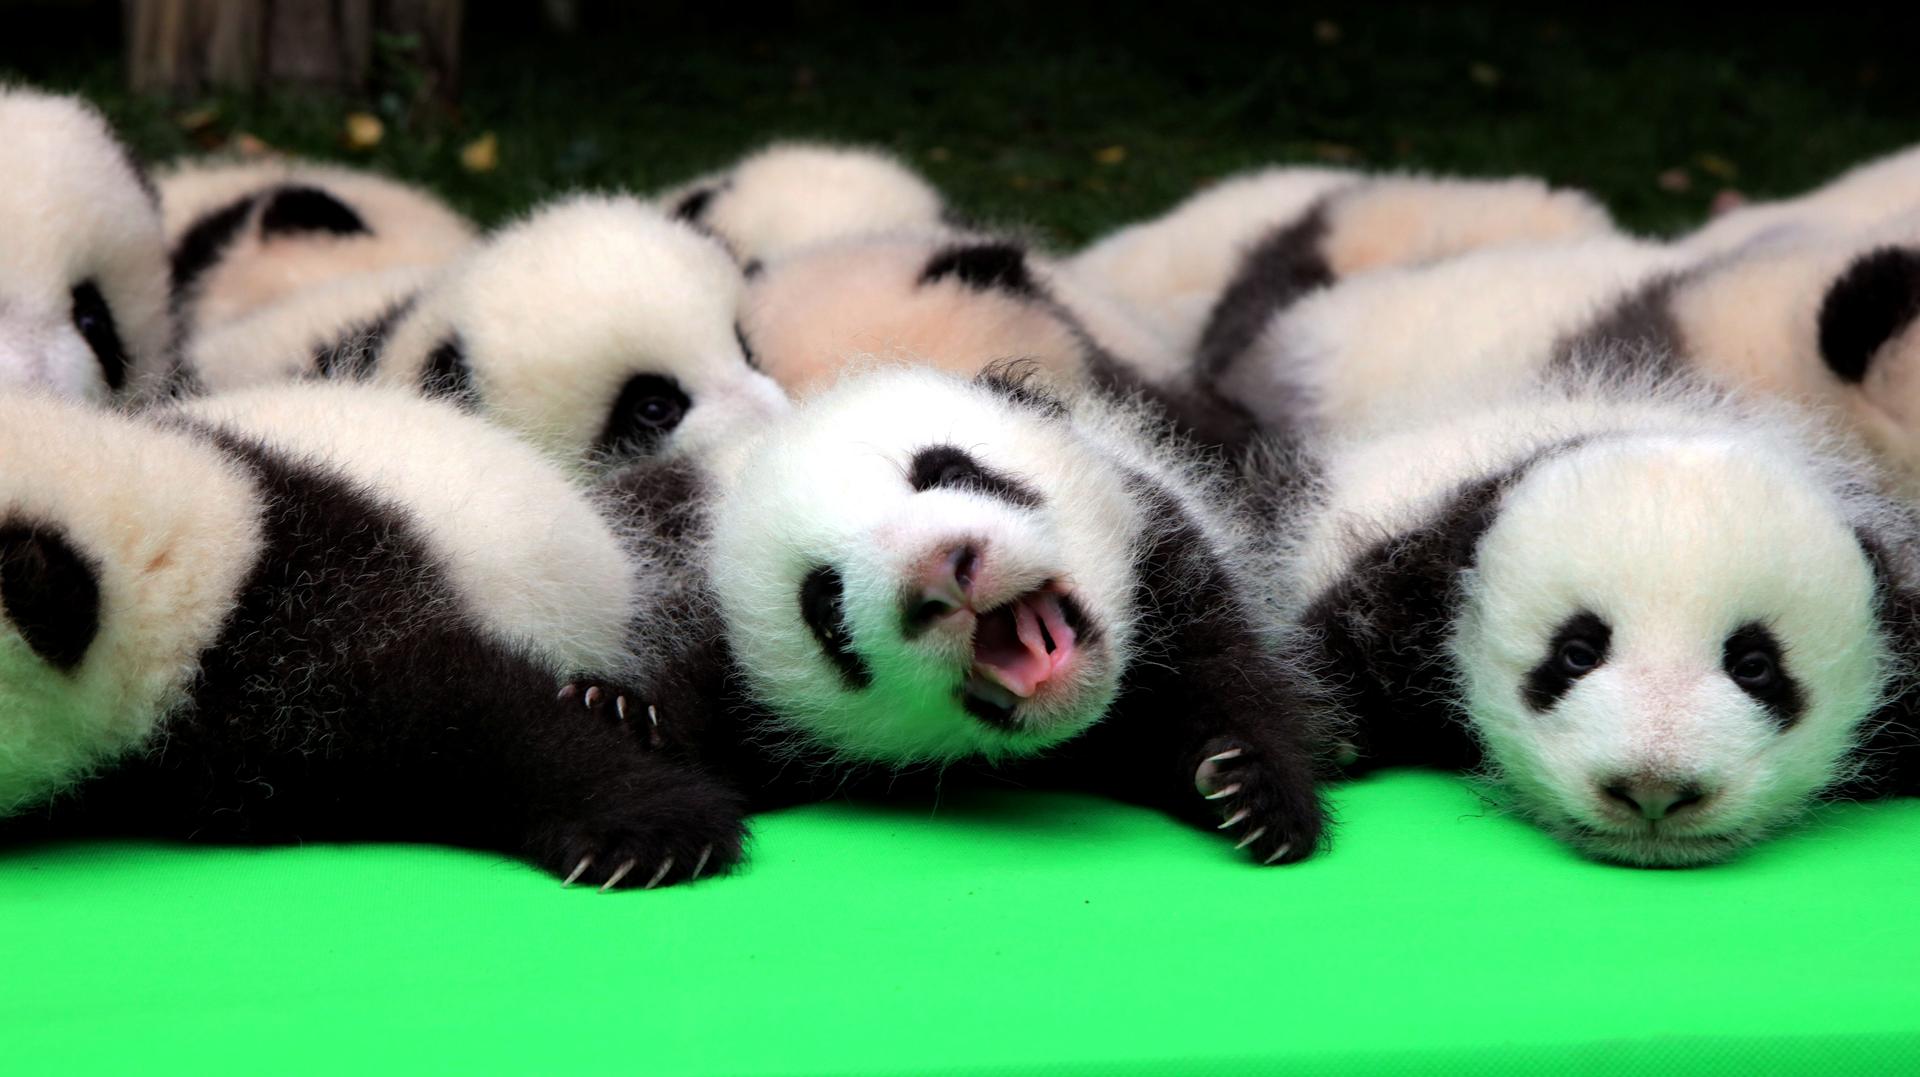 About 23 giant pandas born in 2016 are seen on a display at the Chengdu Research Base of Giant Panda Breeding in Chengdu, Sichuan province, China, September 29, 2016.